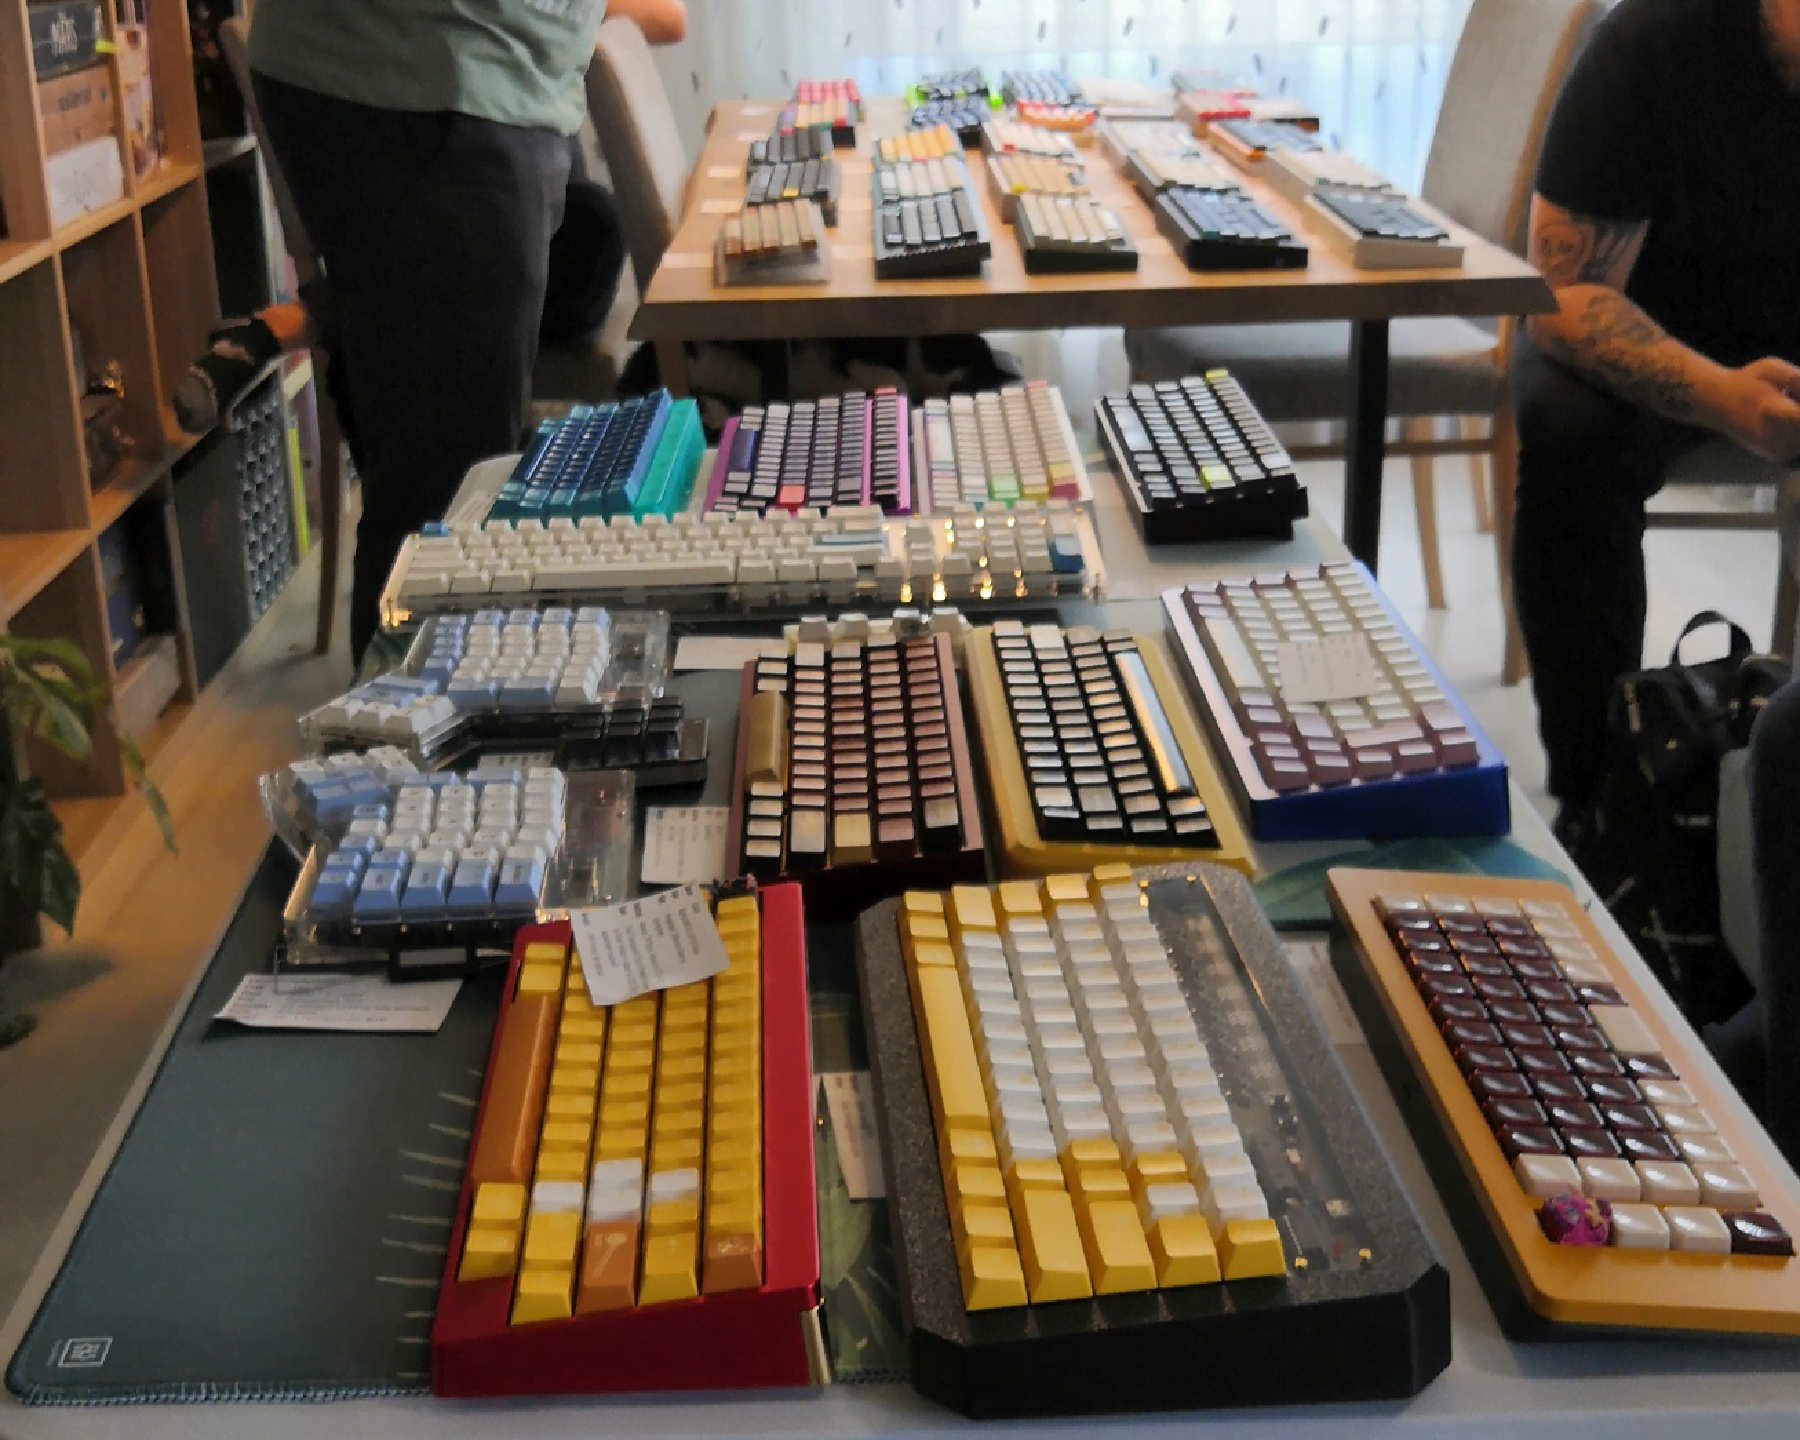 First meetup, picture of all of the keyboards present